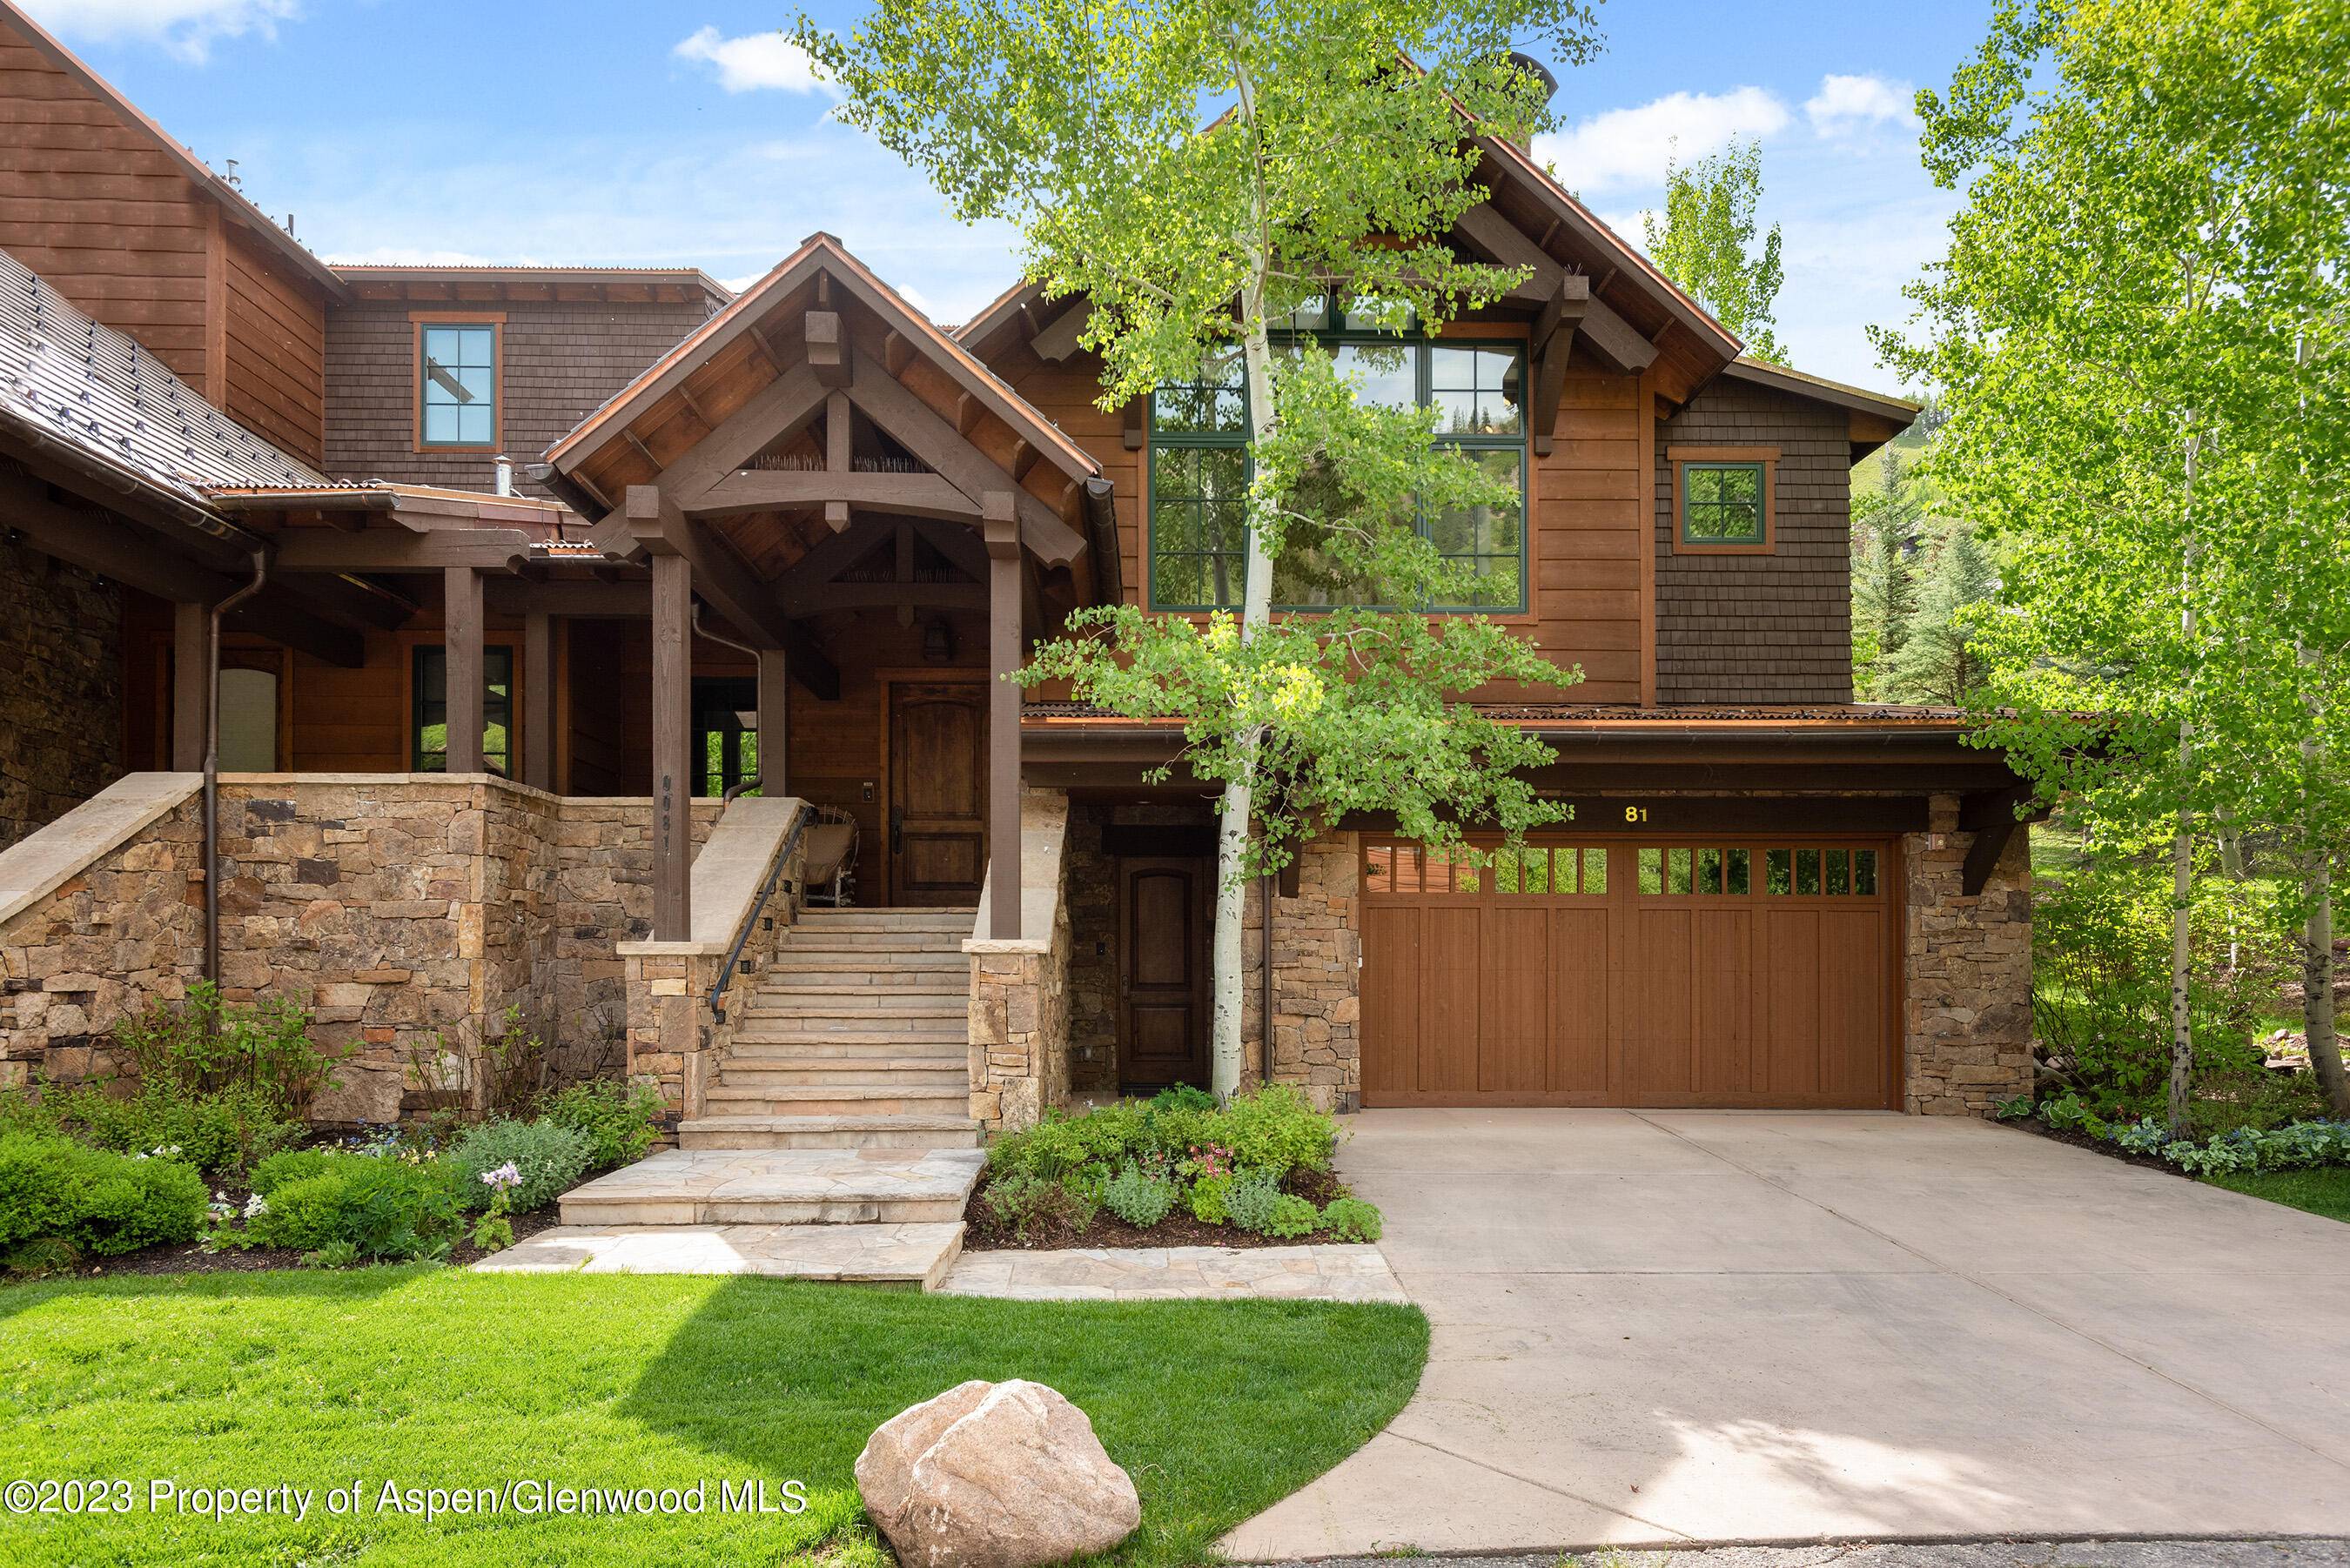 Located just outside the commercial core of Aspen in the spectacular residential neighborhood of Aspen Highlands is this stunning town home offering ample square footage for you and your guests ...